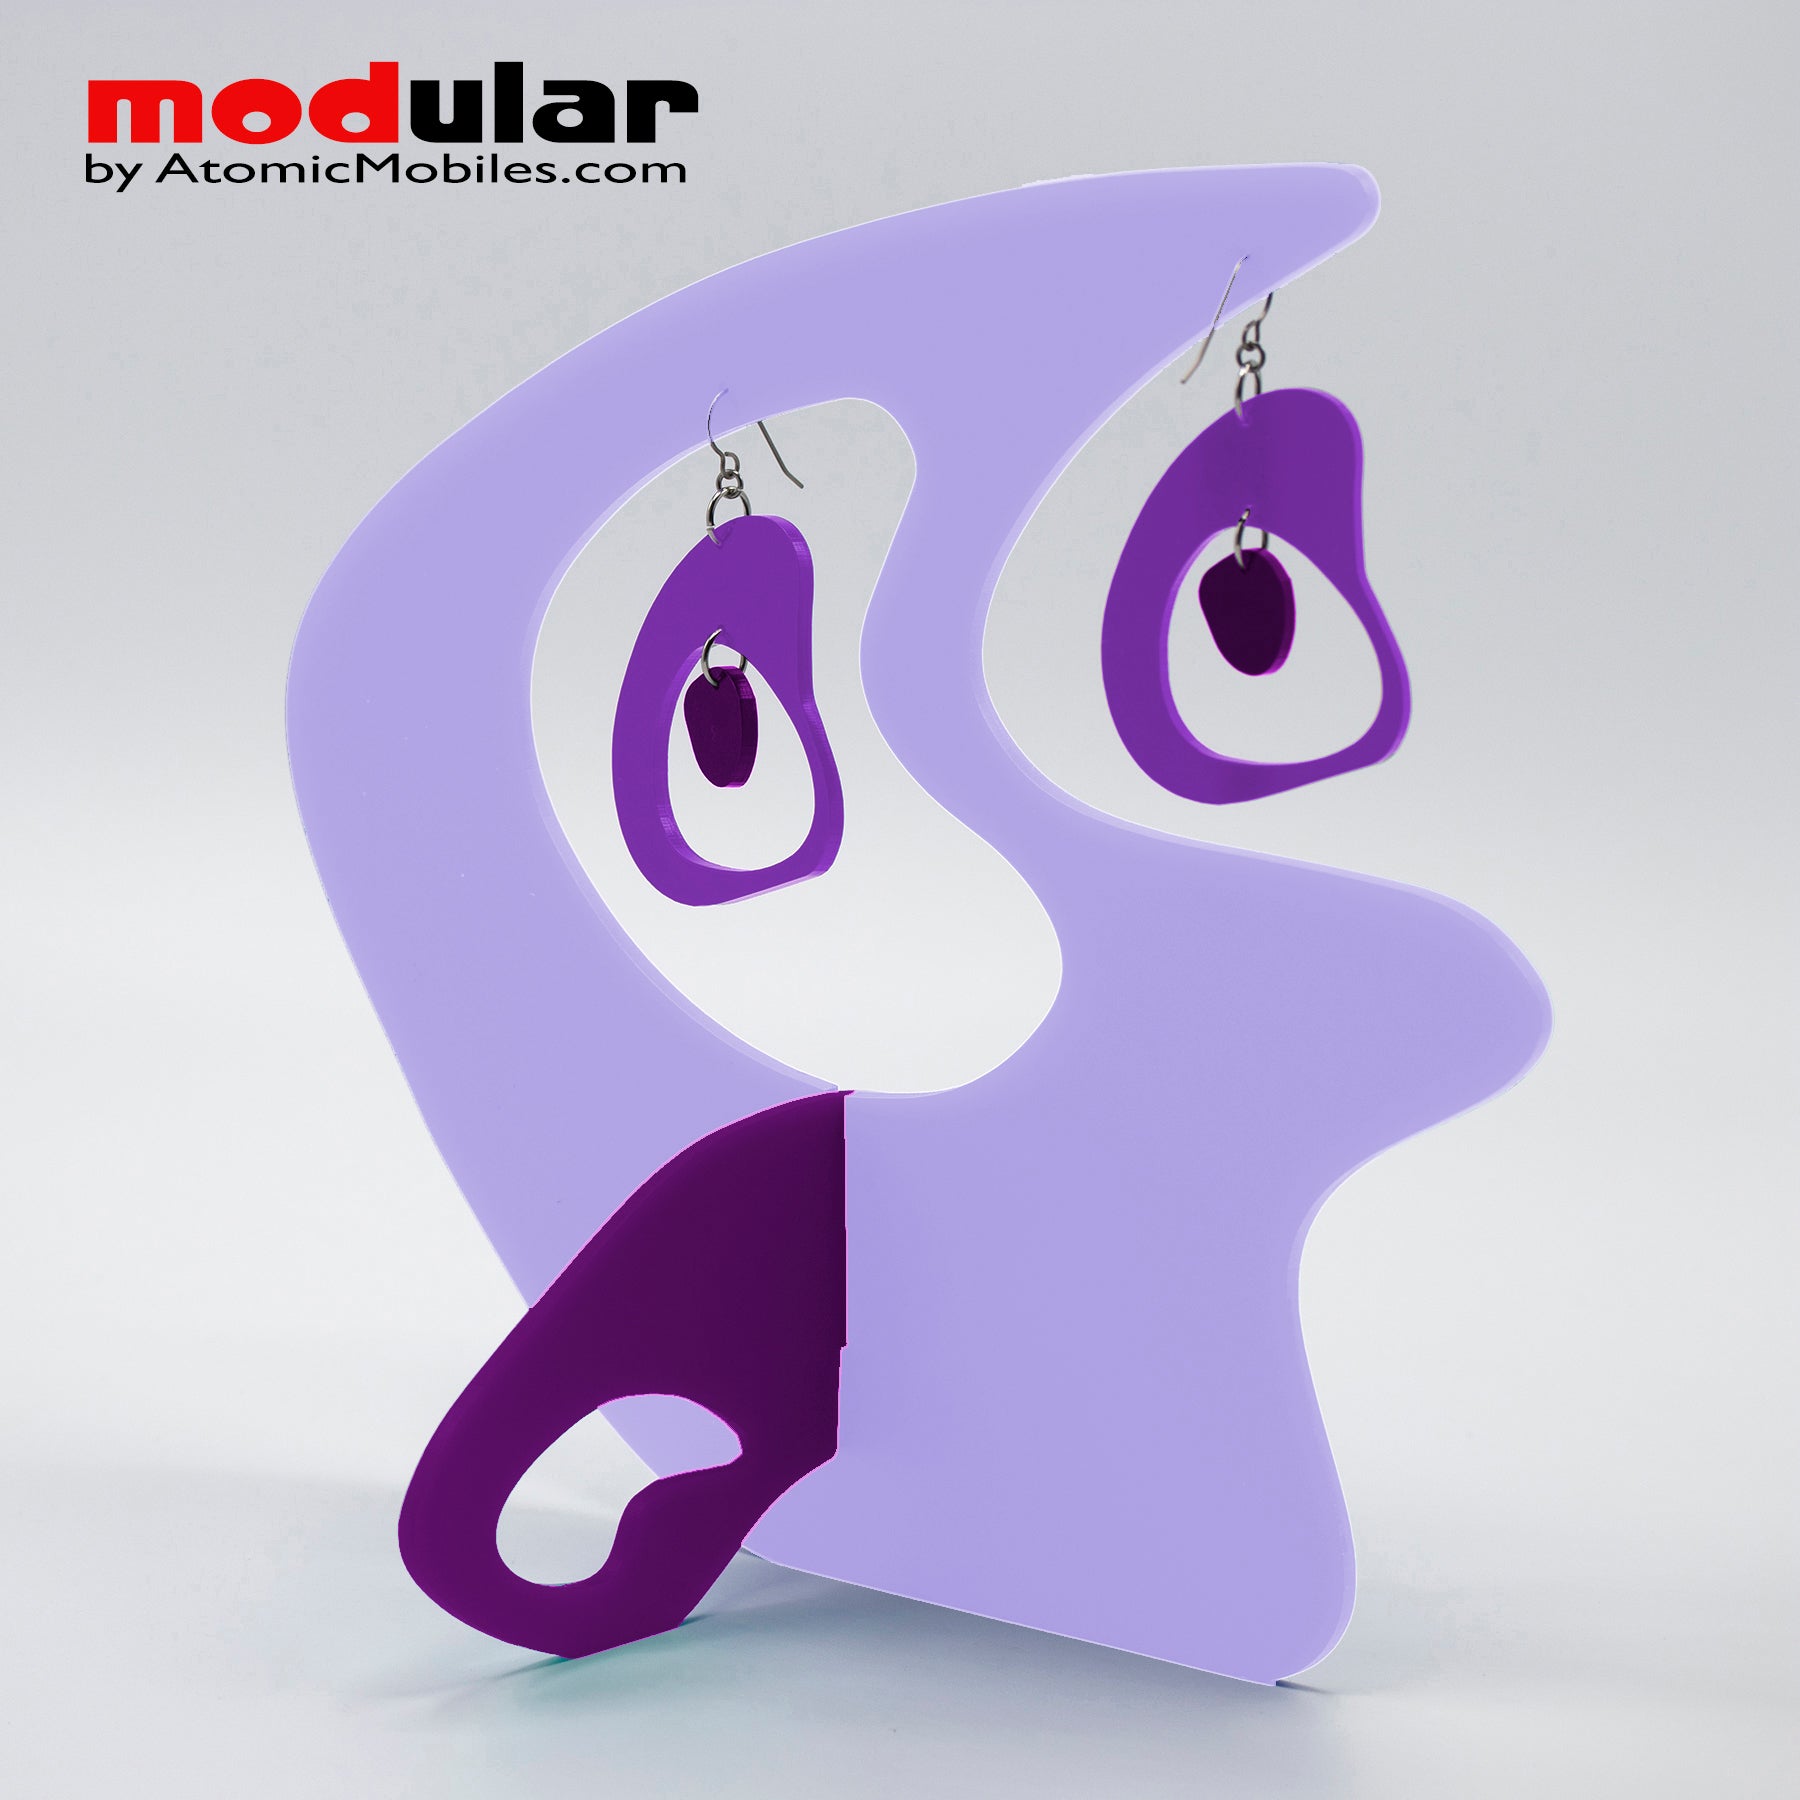 Handmade Boomerang Retro style earrings and stabile kinetic modern art sculpture in Lavender and Purple by AtomicMobiles.com